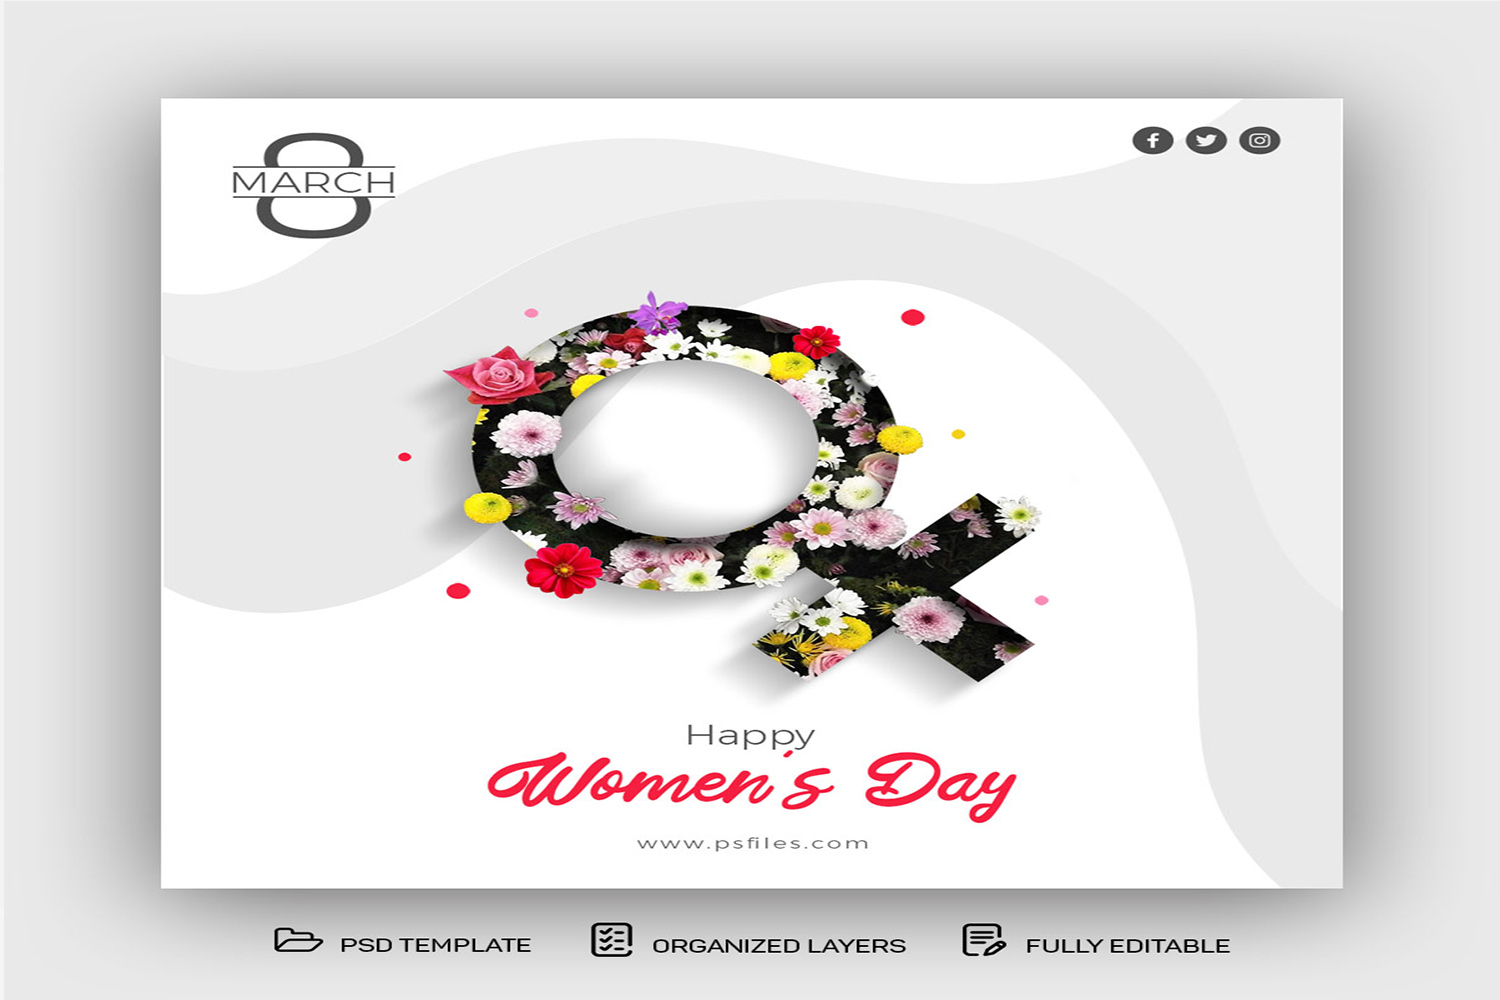 Women’s Day 2020 Post Banner Design Free Templates PSD Free Download